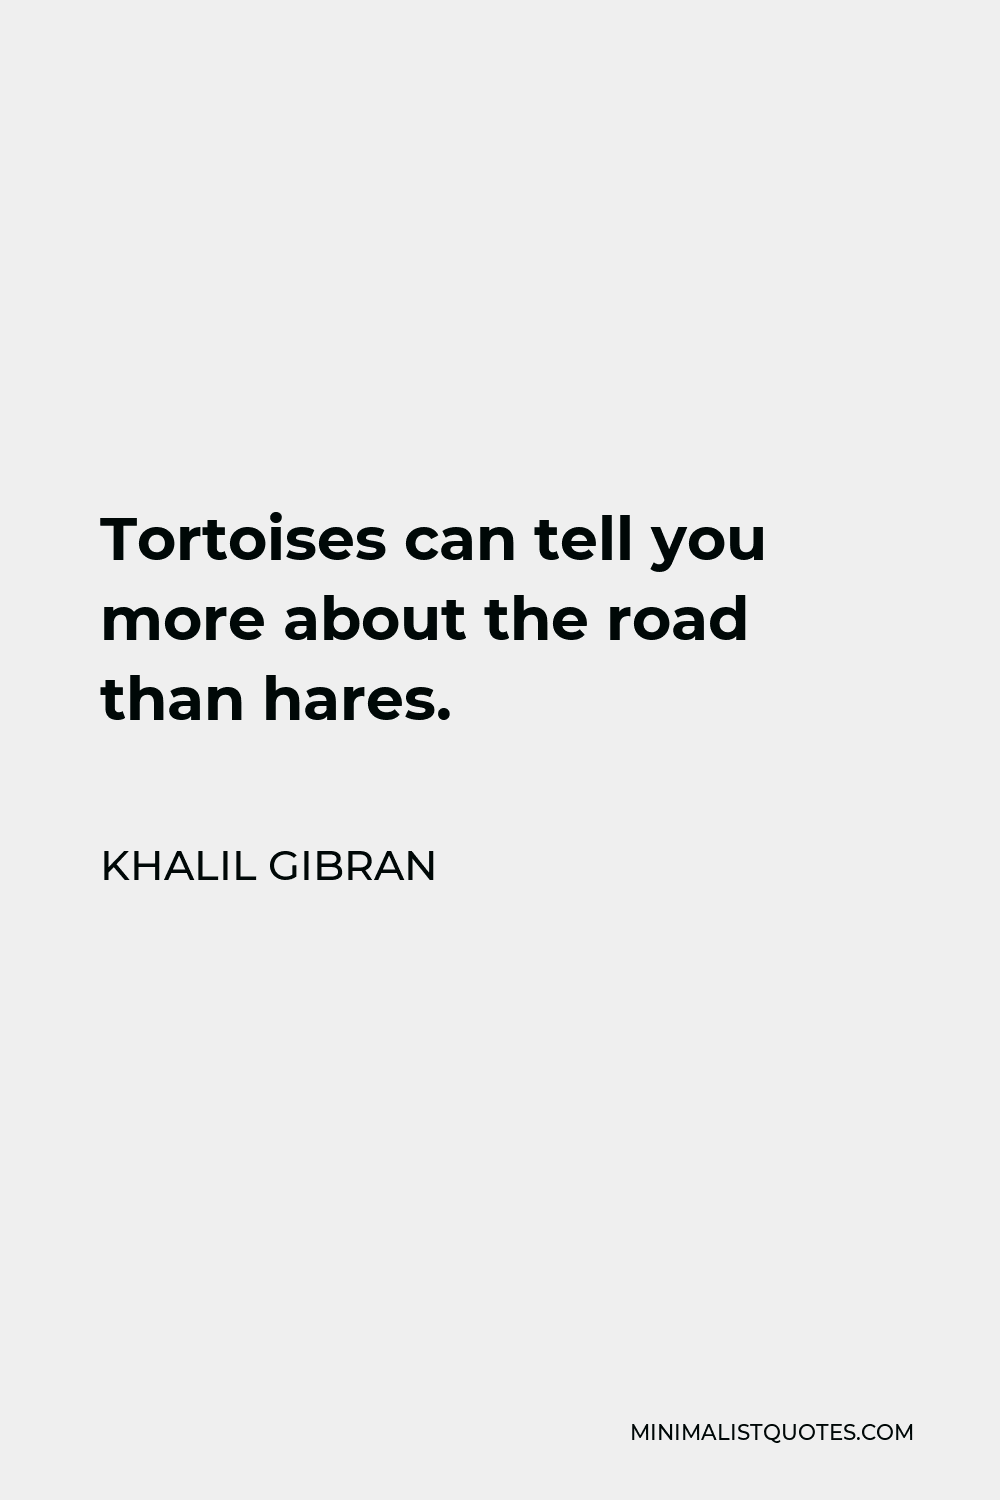 Khalil Gibran Quote - Tortoises can tell you more about the road than hares.